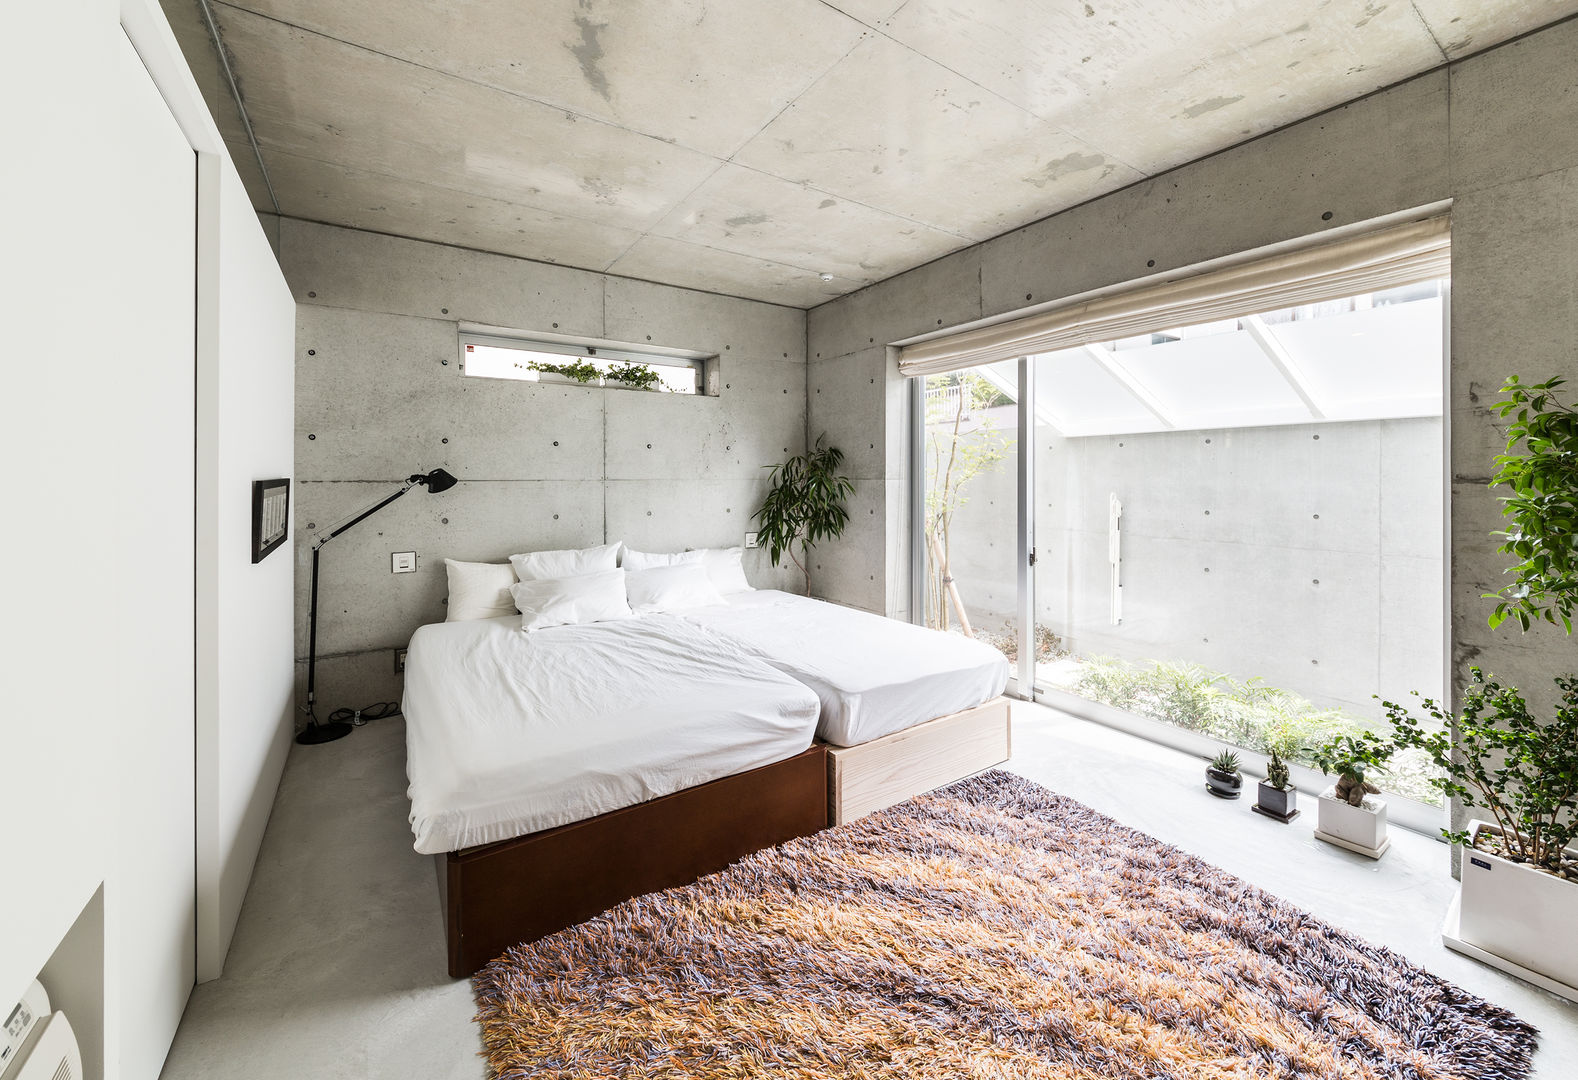 The House supplies a monotonous street with a passing view, Kenji Yanagawa Architect and Associates Kenji Yanagawa Architect and Associates Habitaciones modernas